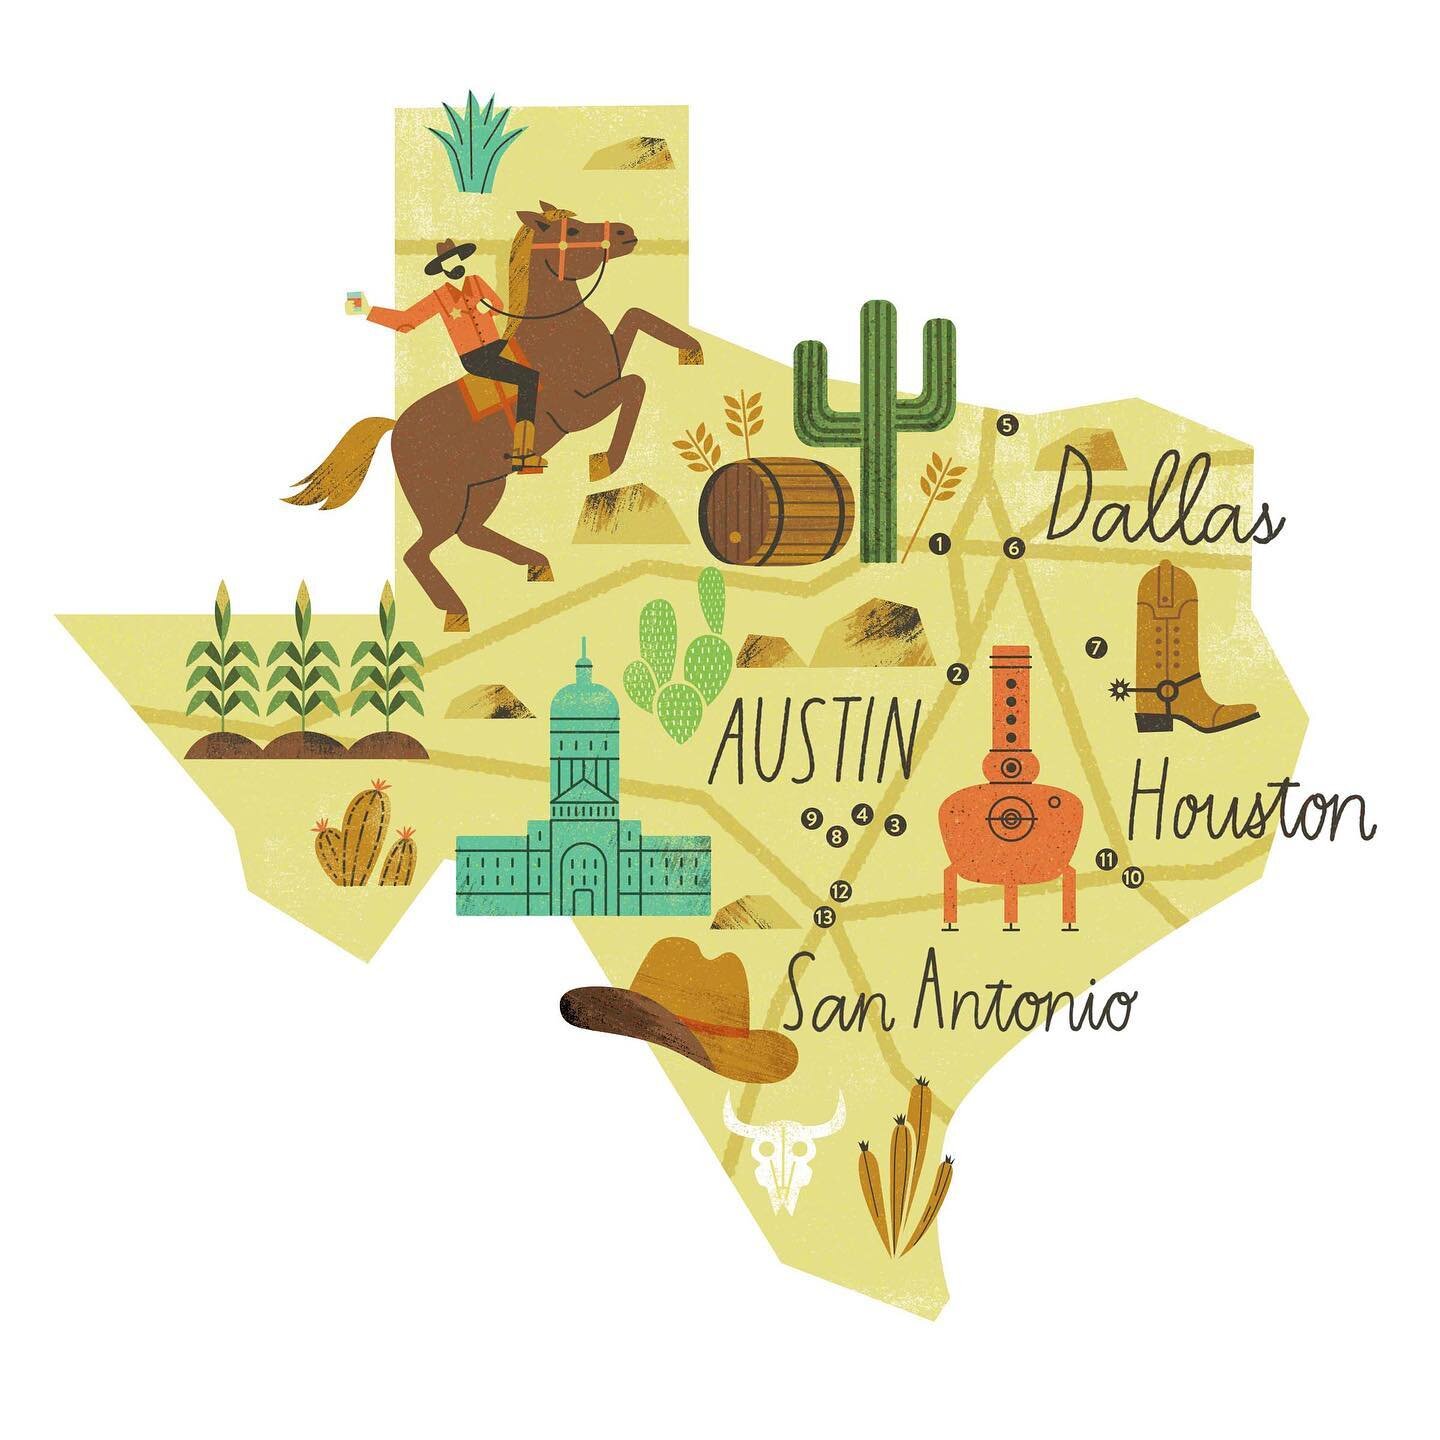 &ldquo;Big, Bold Texas - The Lone Star State has emerged as a center of whiskey making.&rdquo;
Here is a recent illustration listing notable distilleries in Texas for @whiskyadvocate mag. 🥃🤠
.
.
.
#editorial #illustration #print #texas #map #mapill